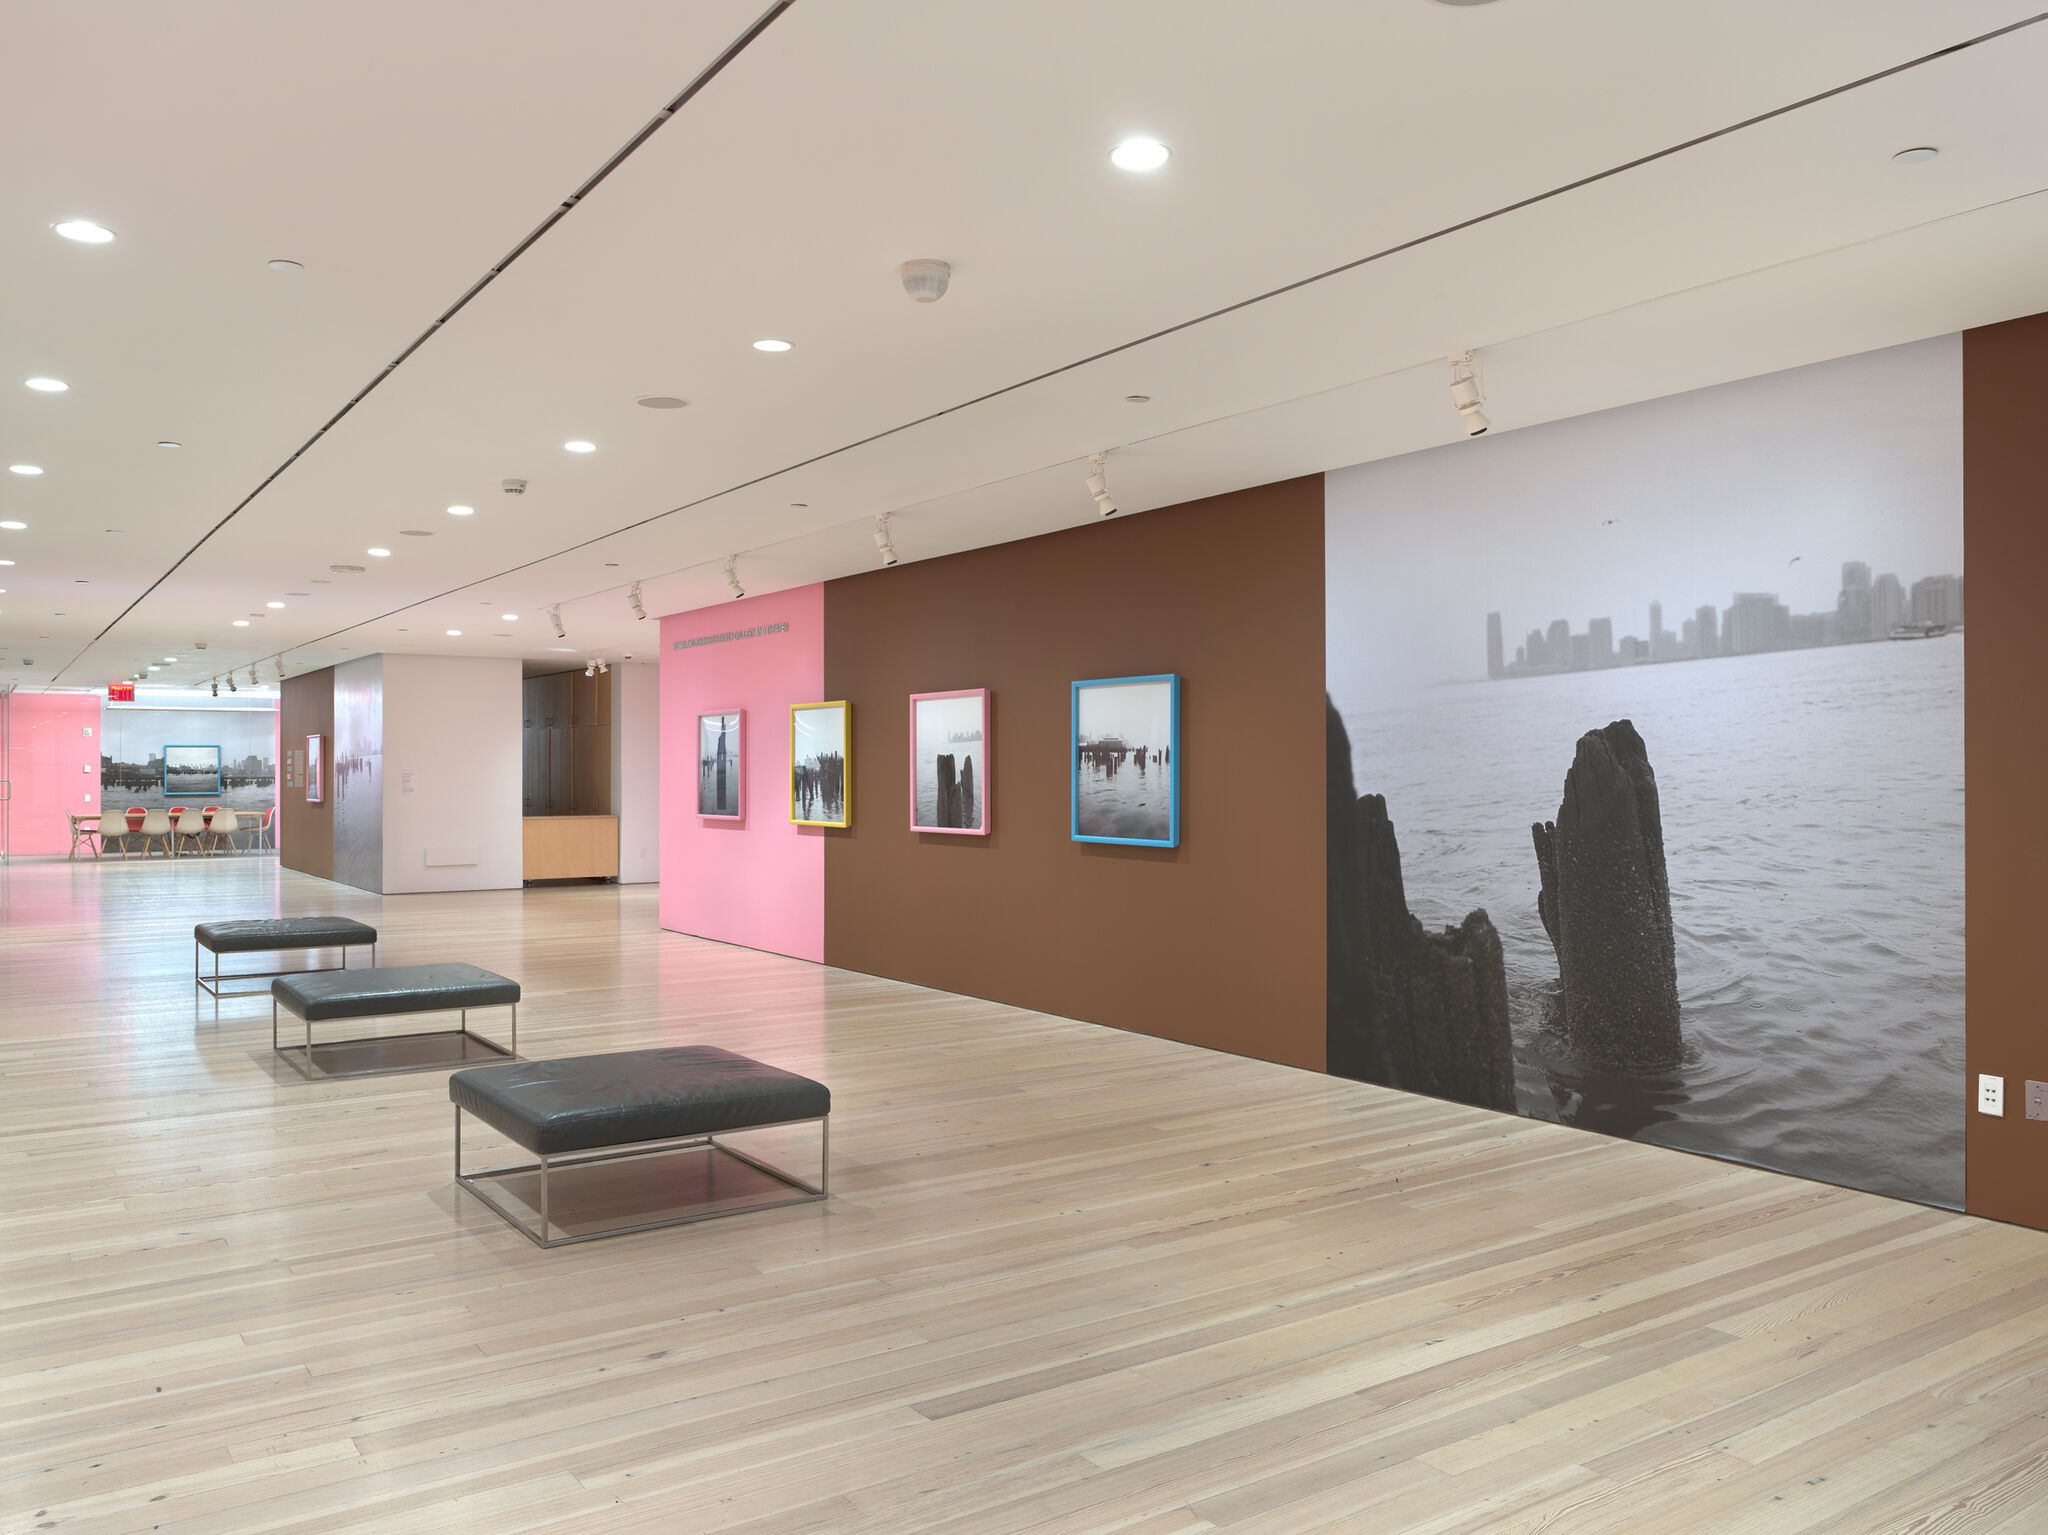 Four black and white photographs of Manhattan's westside waterfront on a pink and black gallery wall next to a large photograph of the Hudson River.